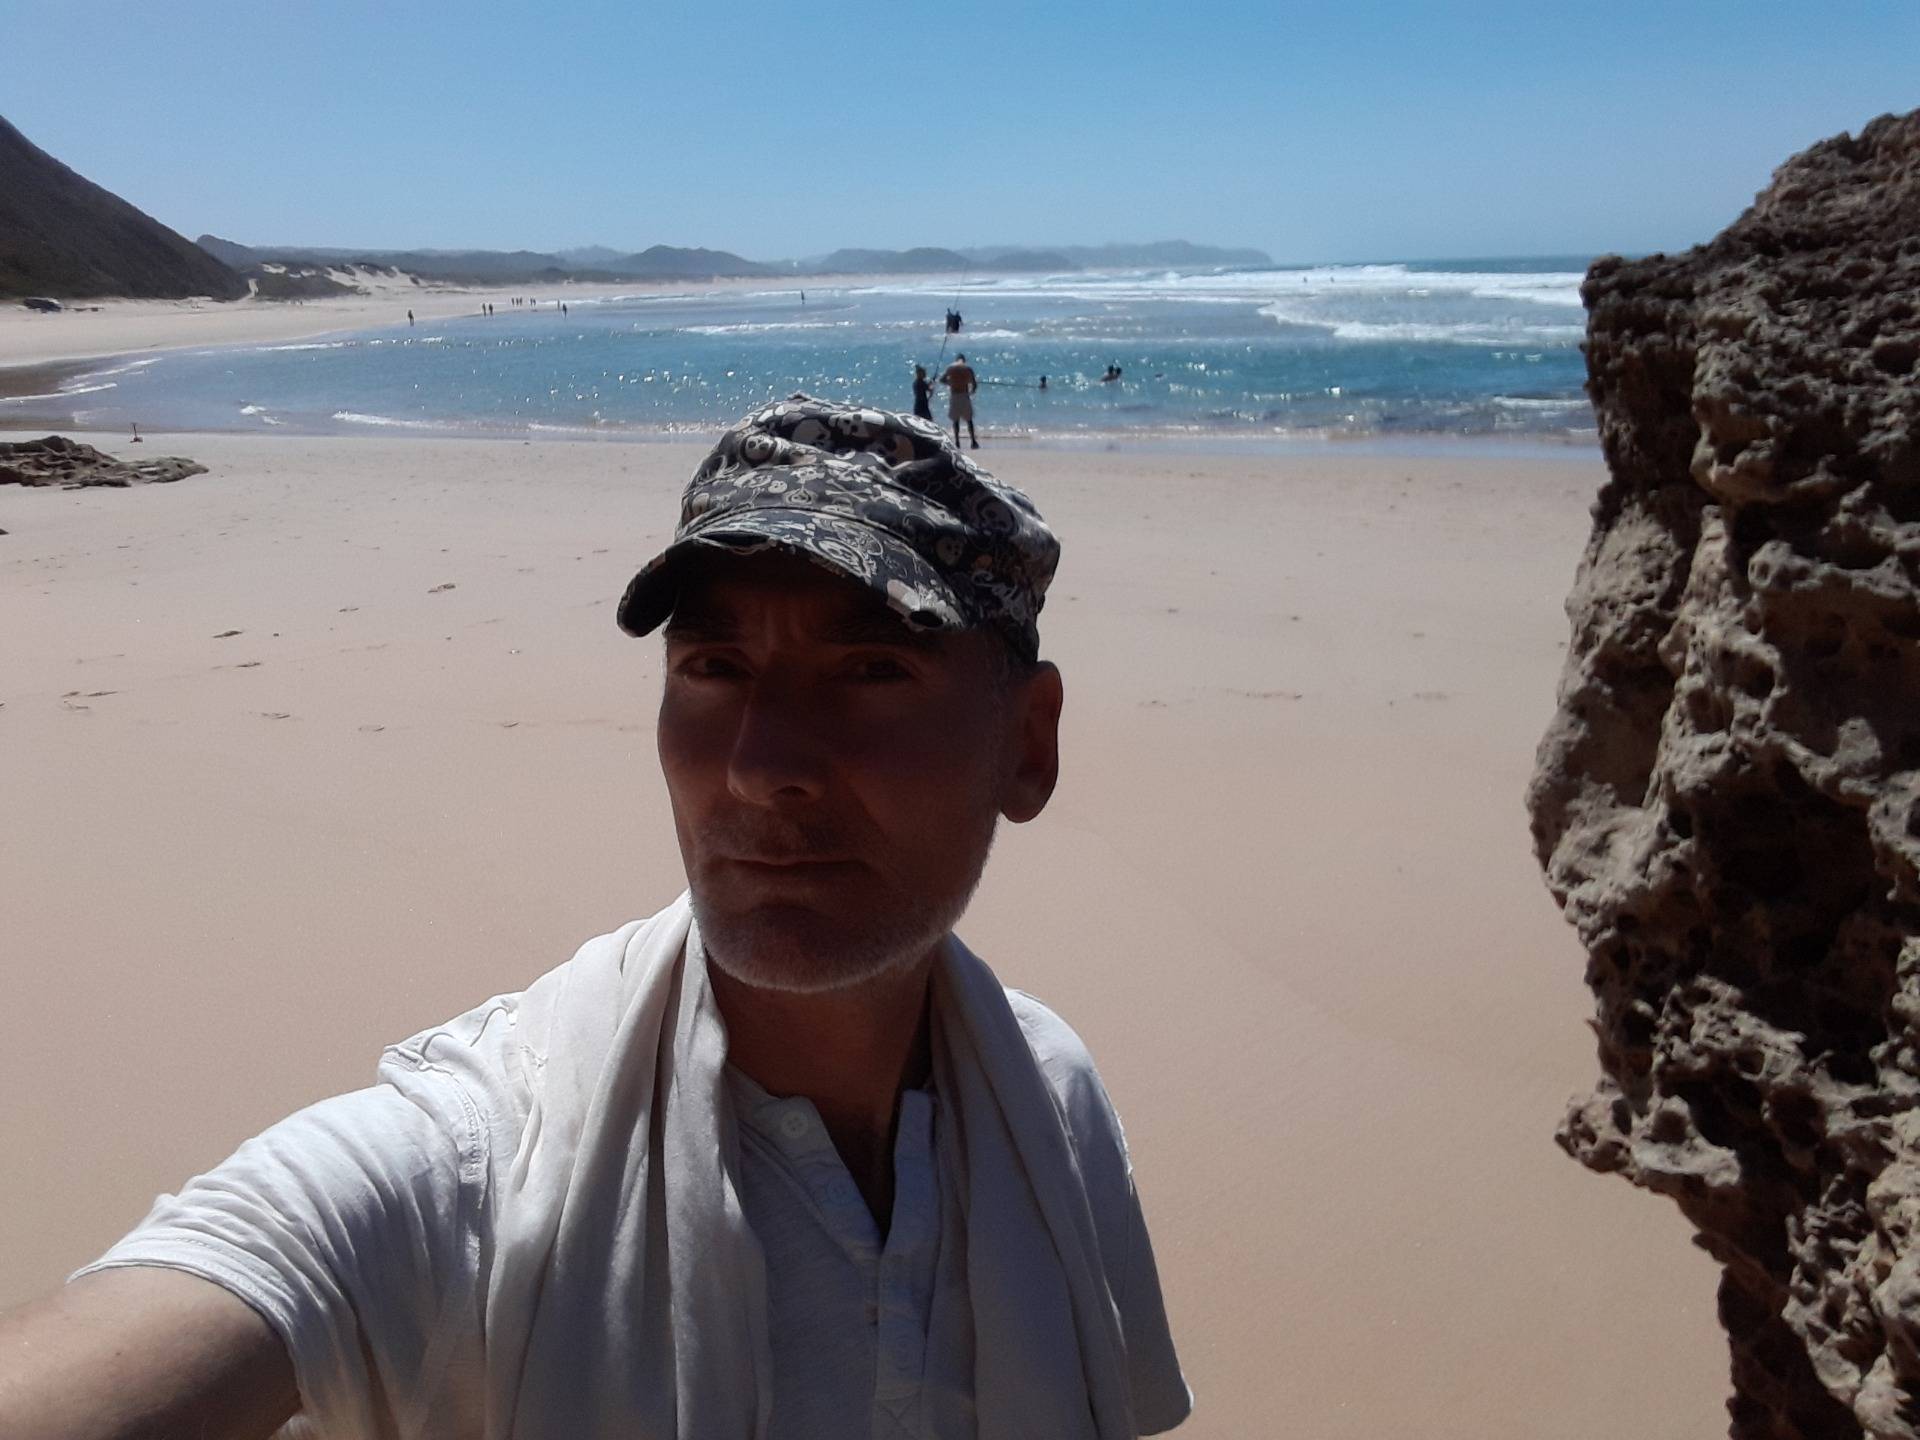 Another day in paradise aka the Garden Route - Gericke's Point beach